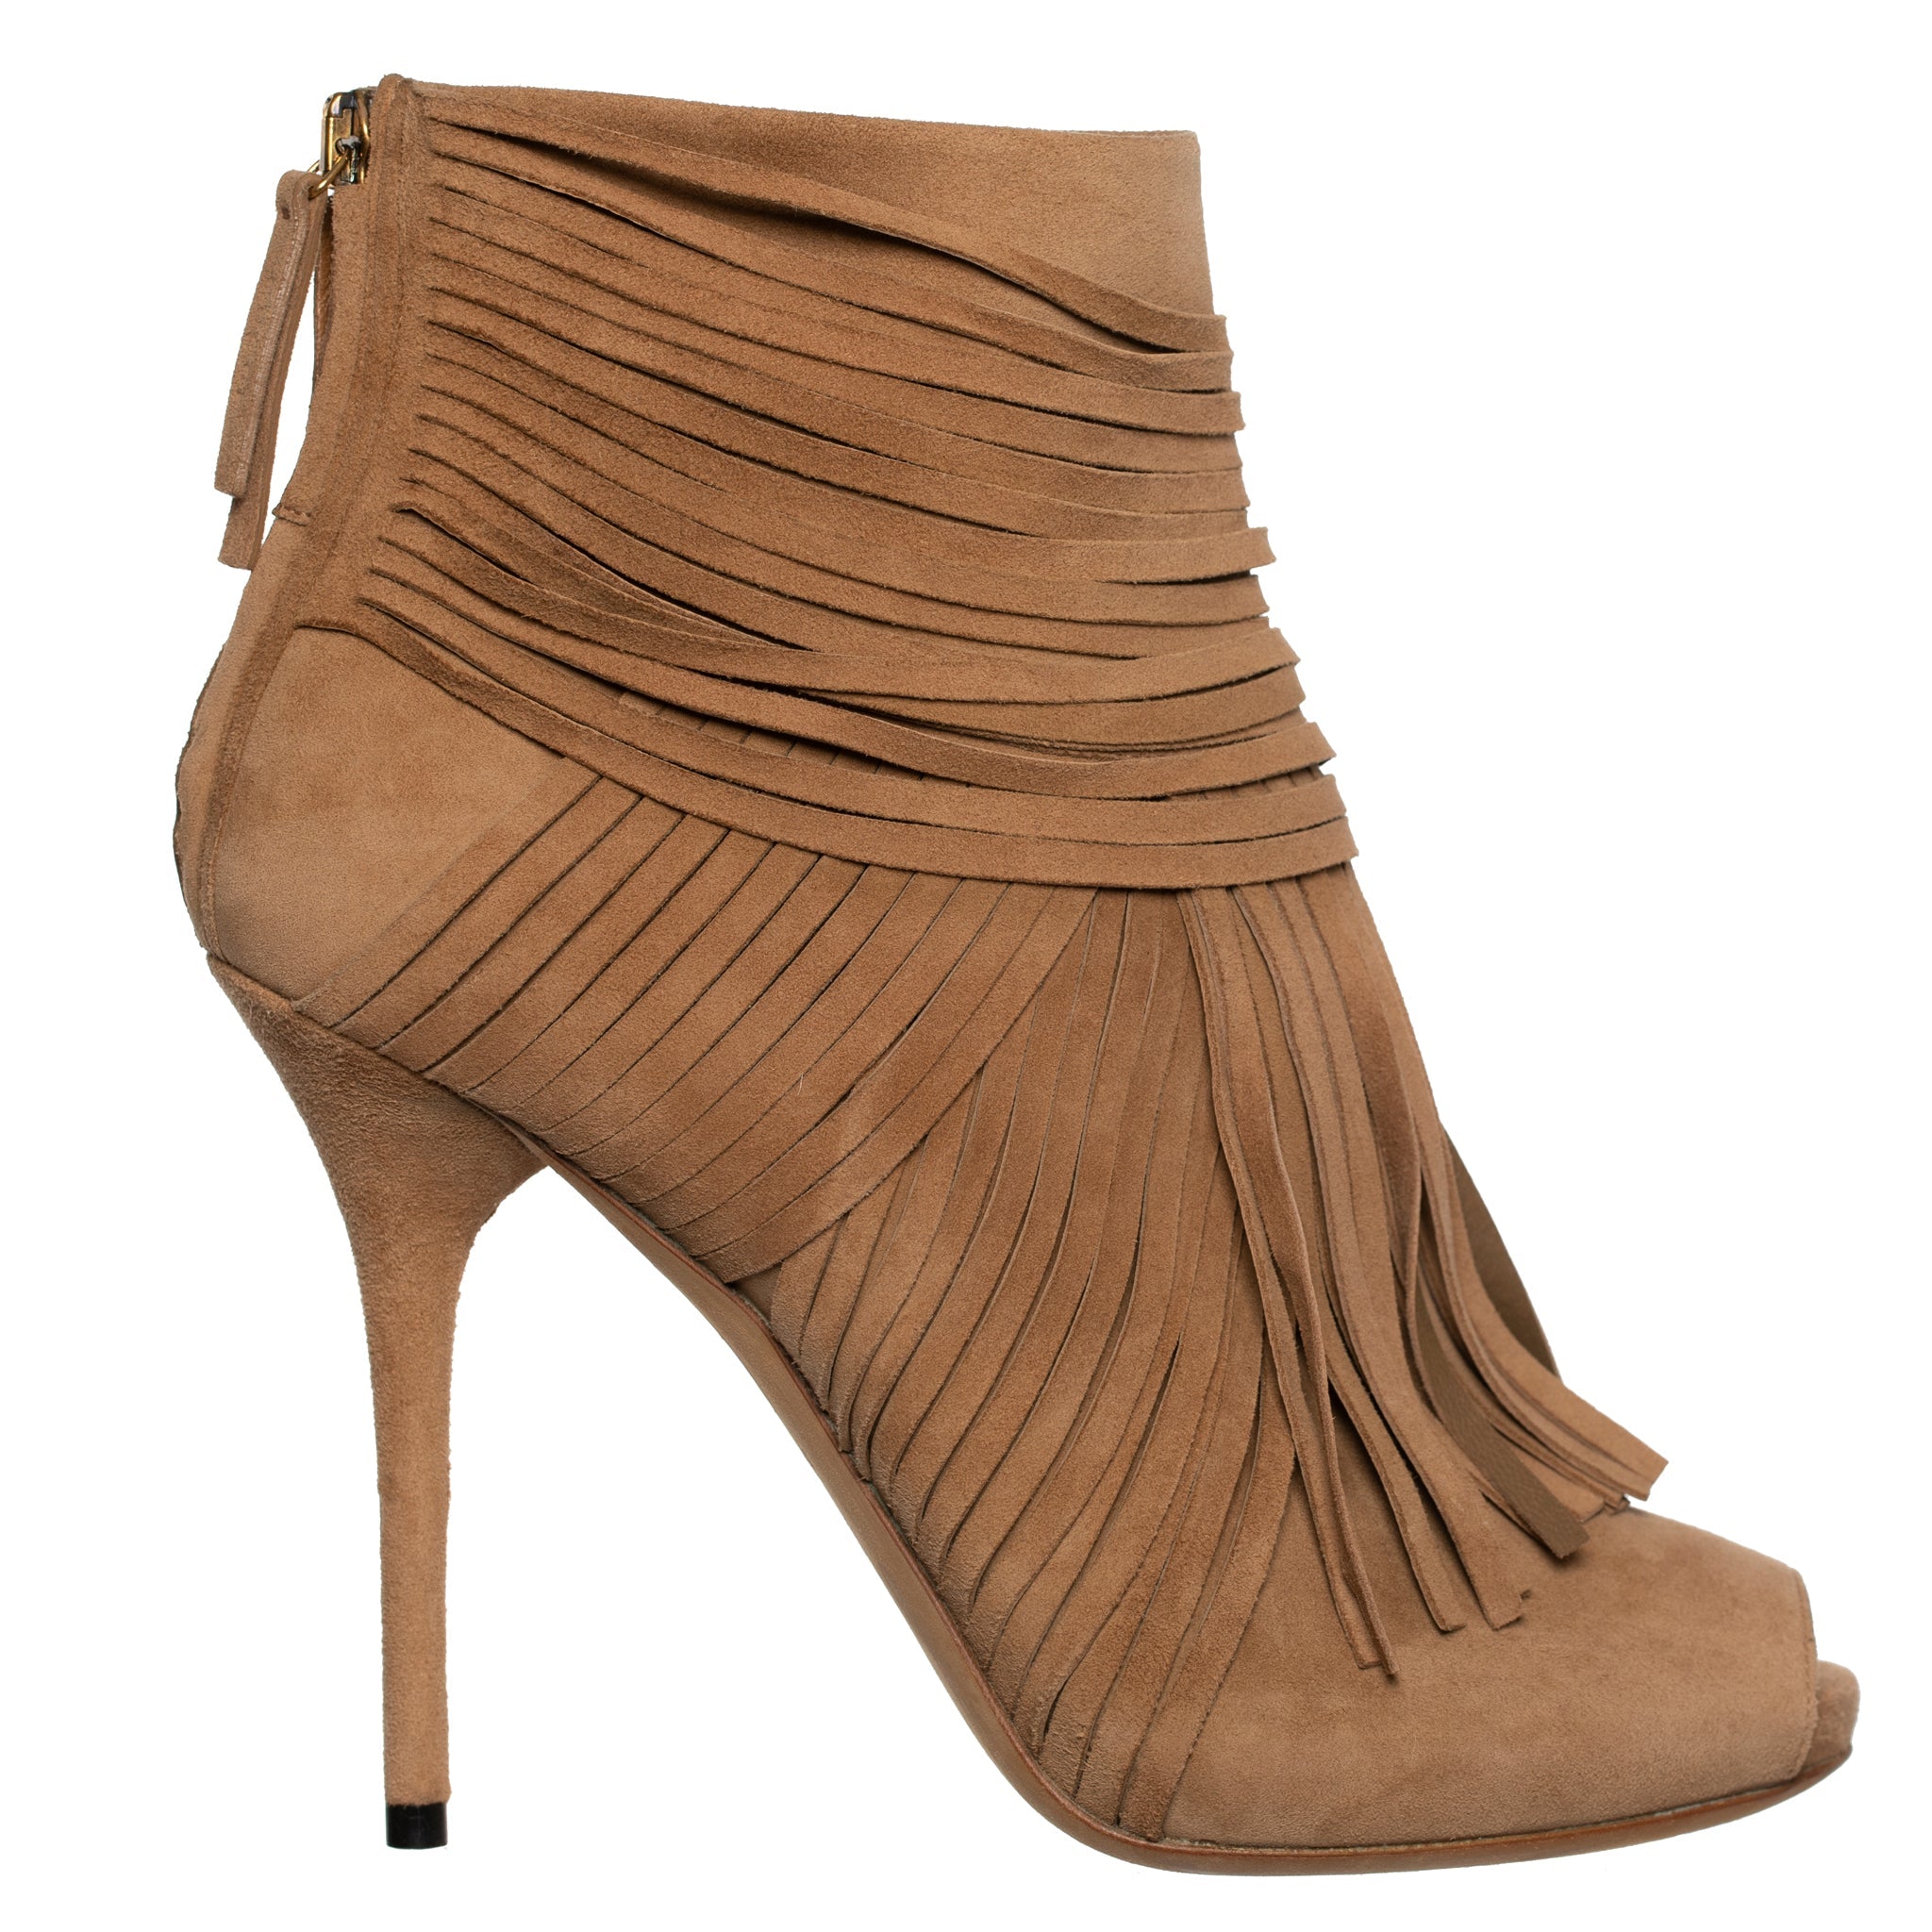 GUCCI ACKERMAN SUEDE FRINGE TAN BOOTIES 38 IT - On Repeat